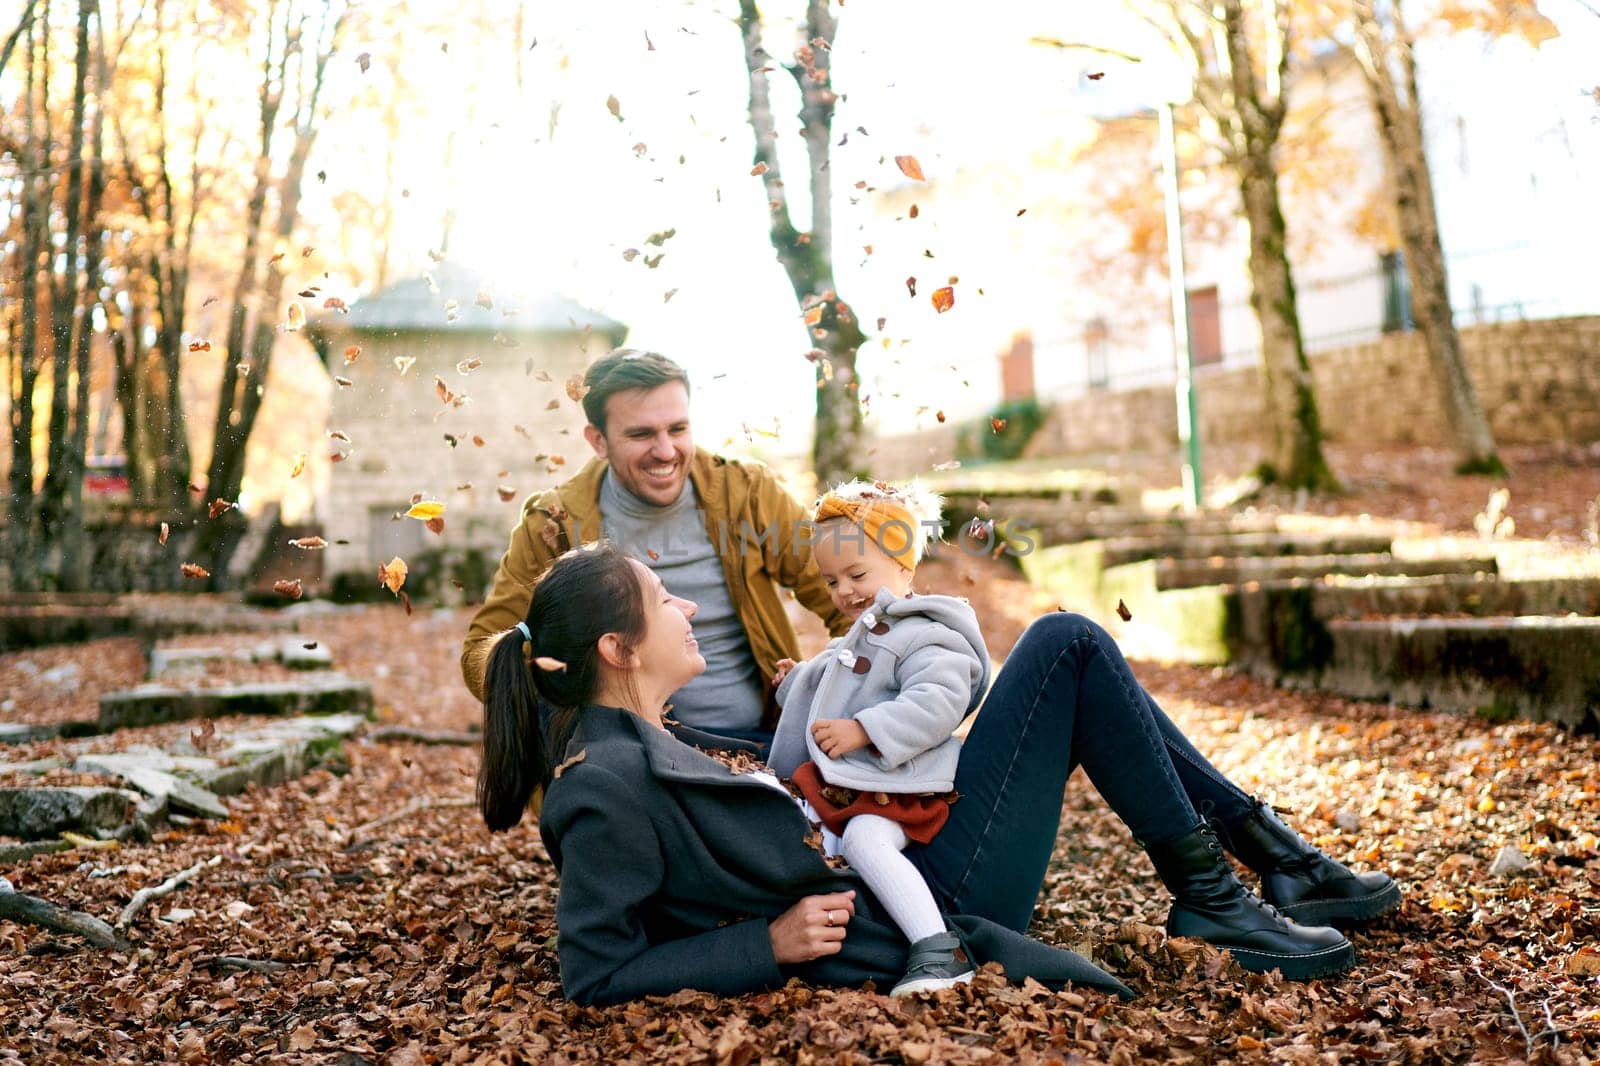 Dad sits next to mom lying on the ground with a little girl on her stomach under falling leaves. High quality photo